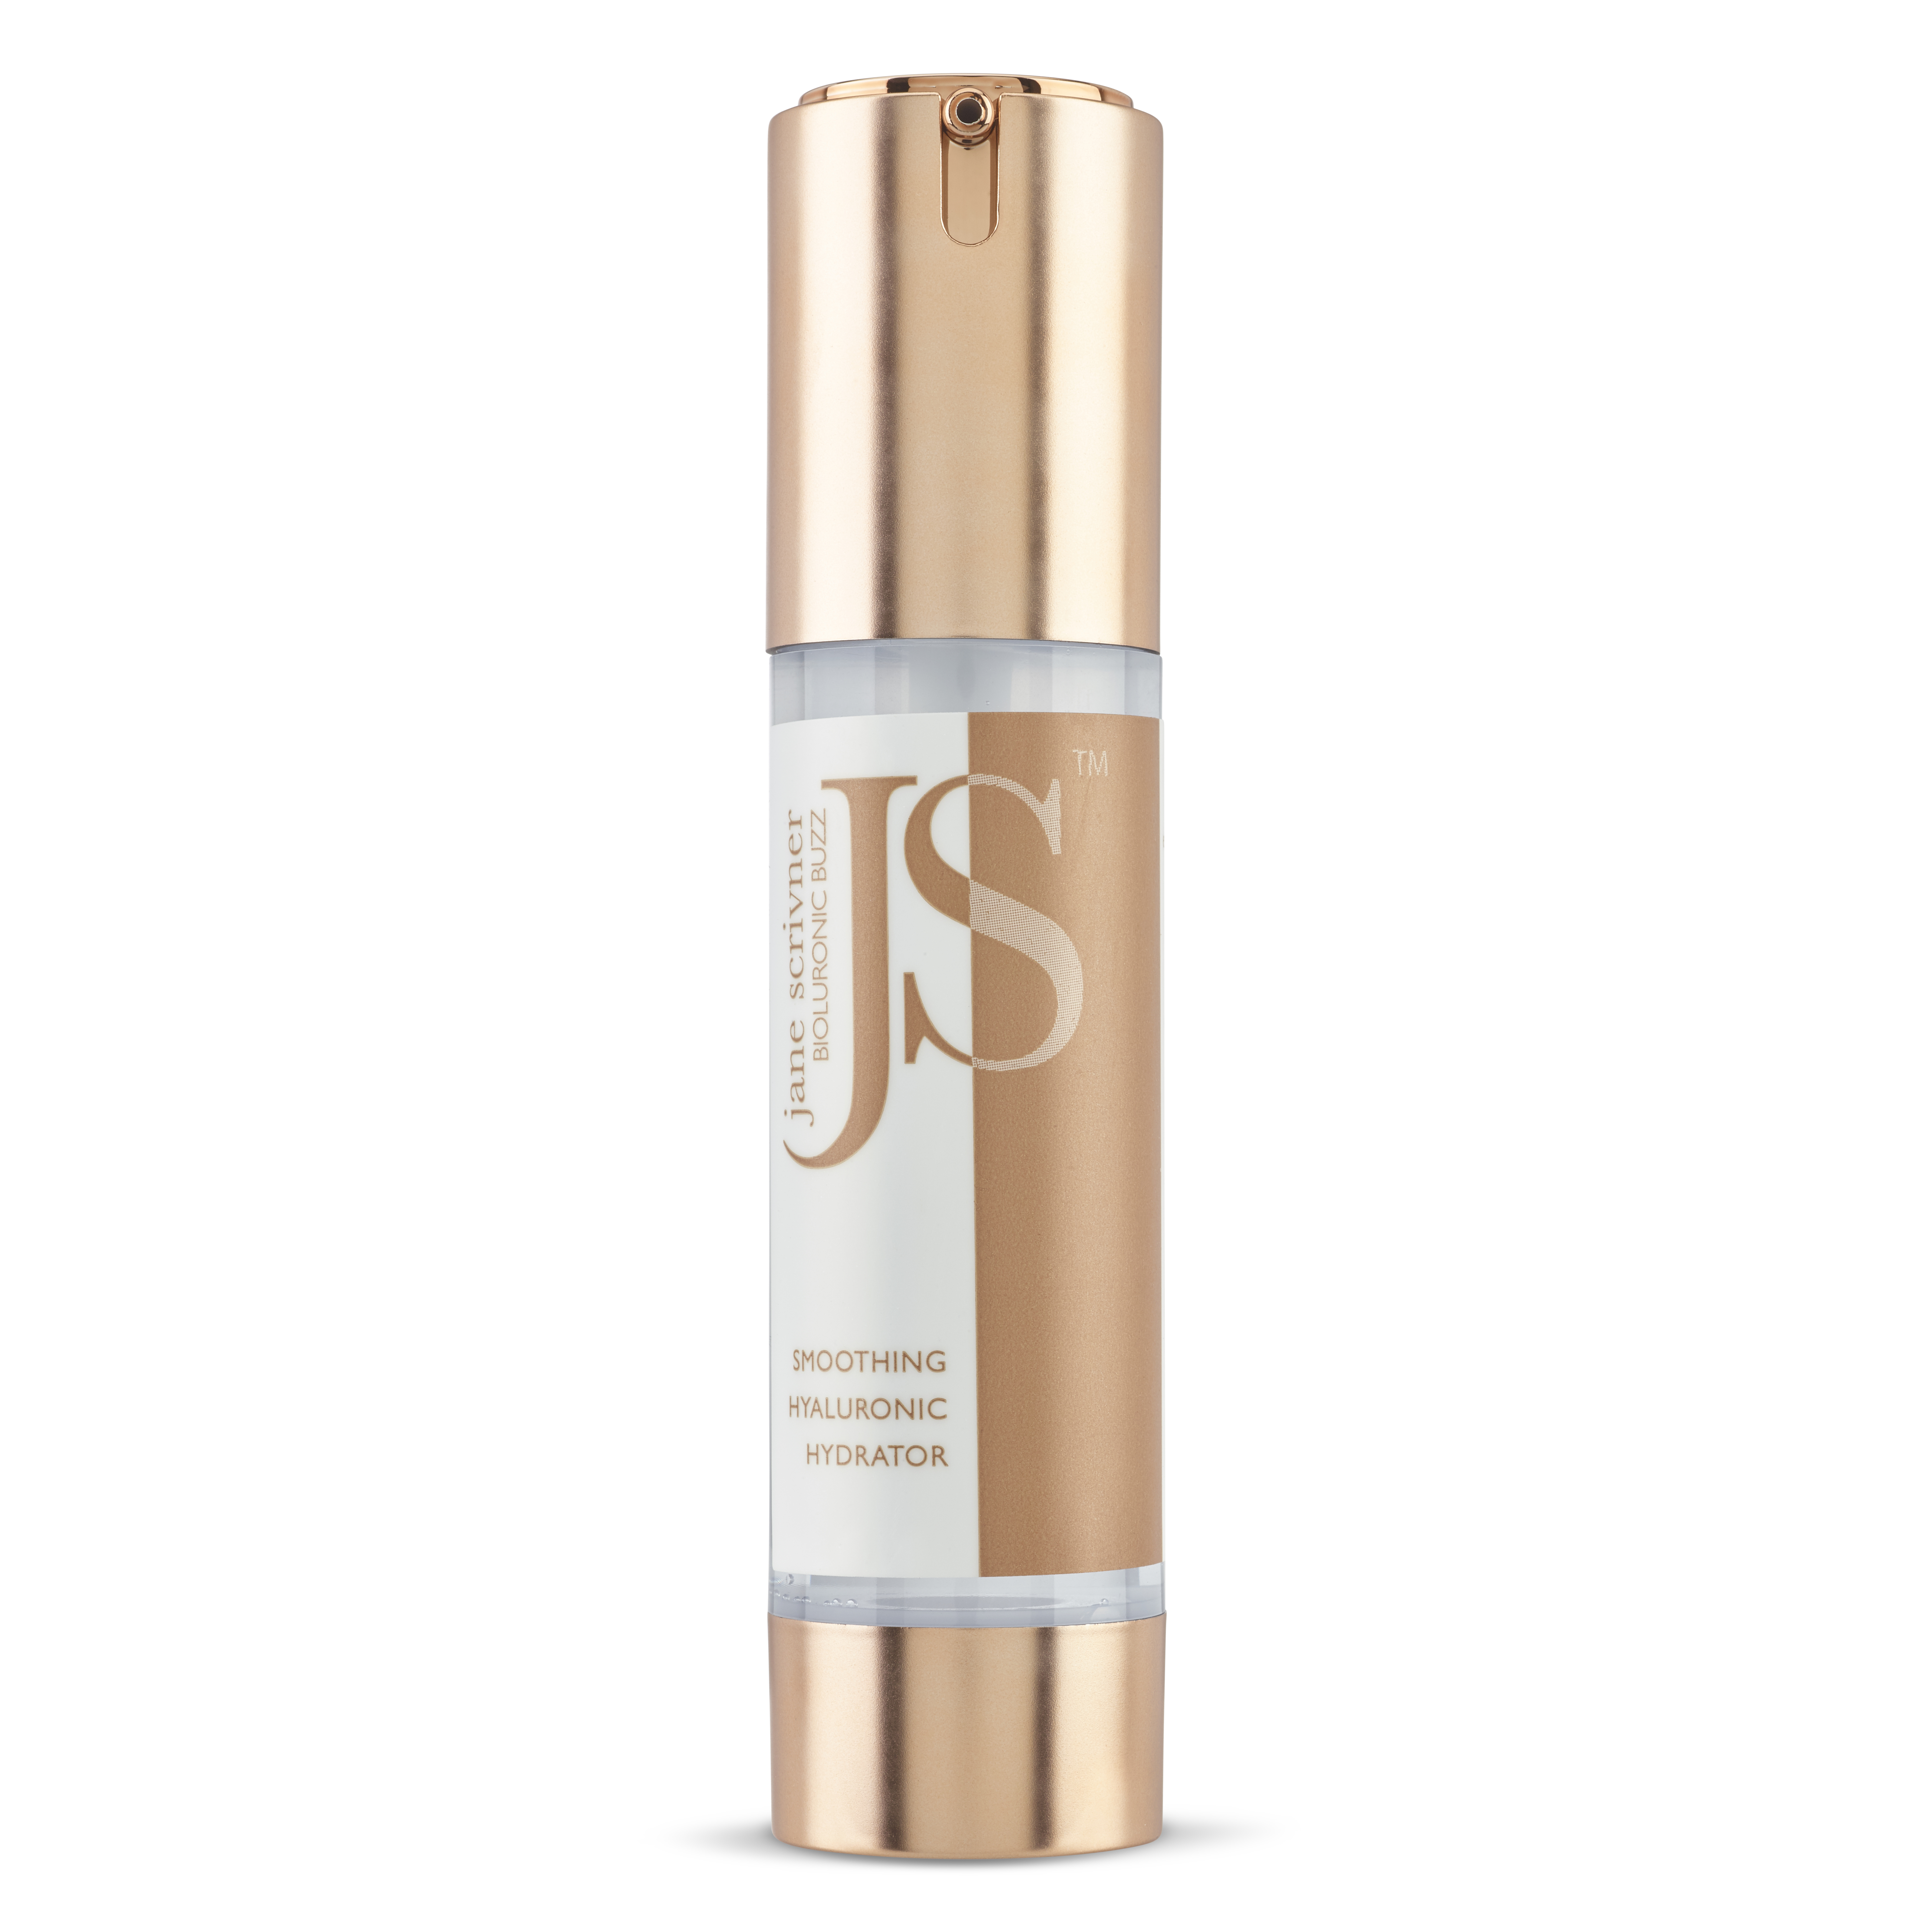 BIOLURONIC BUZZ Smoothing Hyaluronic Hydrator 50g Bottle with Drop Shadow